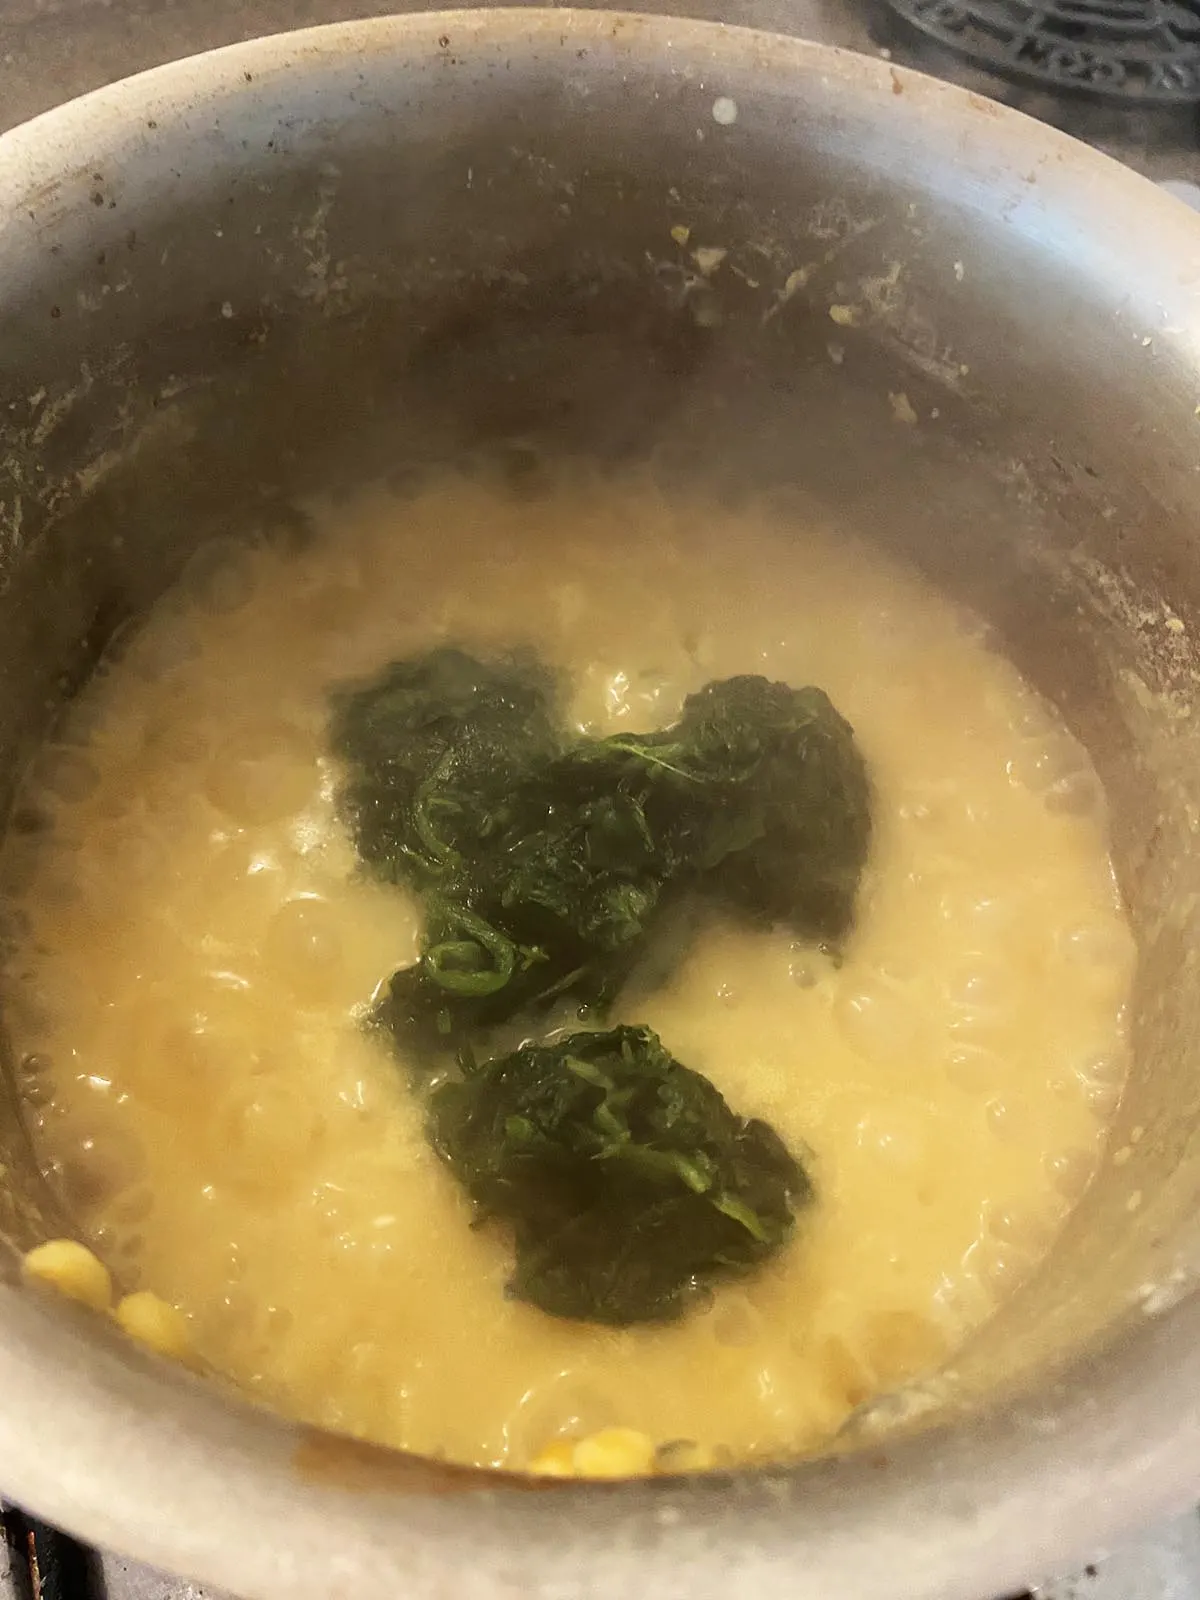 Adding spinach to dhal